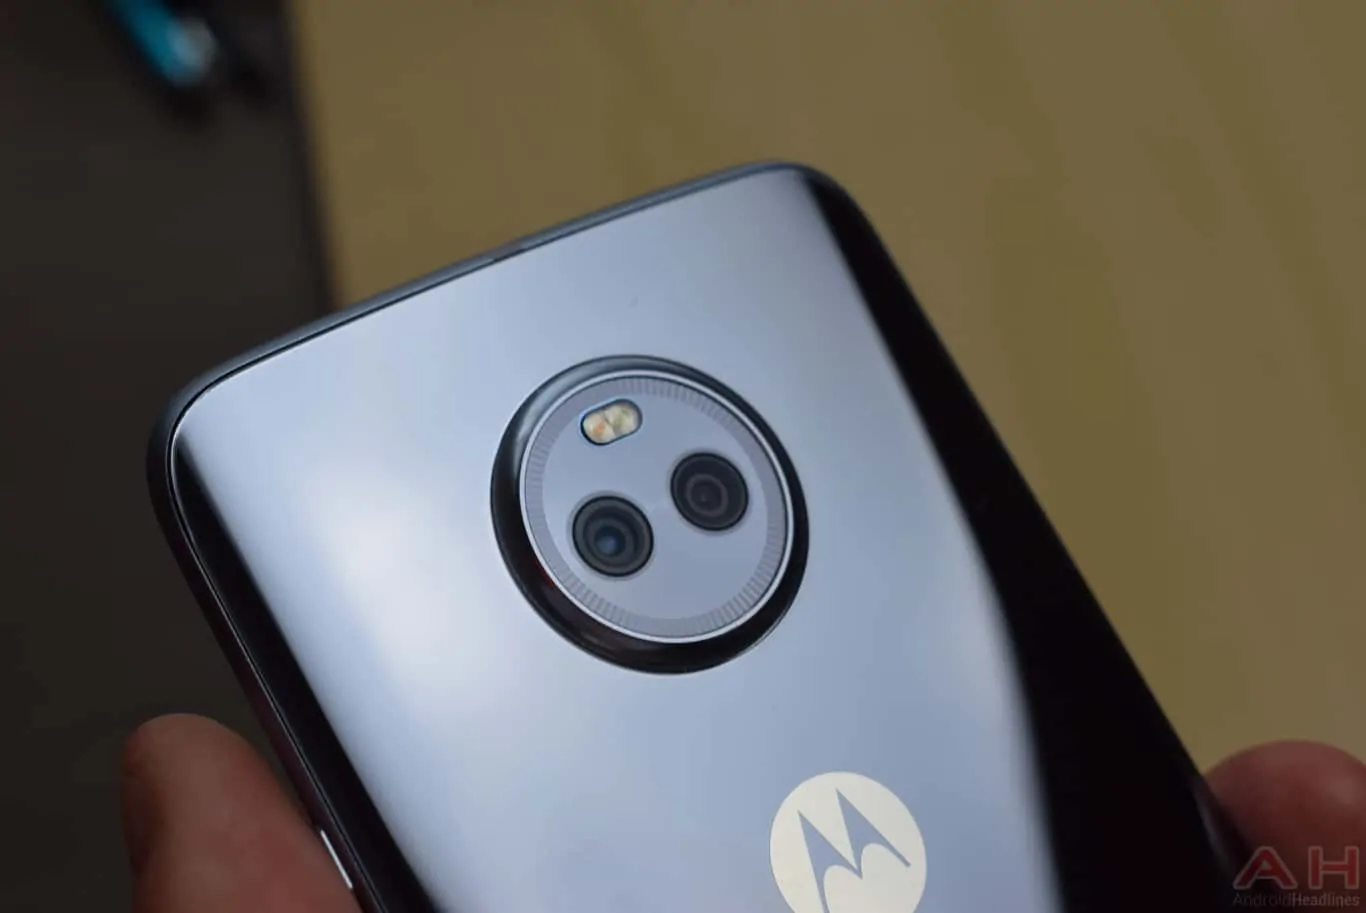 Featured image for Android 8.1 Oreo Update Now Hitting Some Moto X4 Models